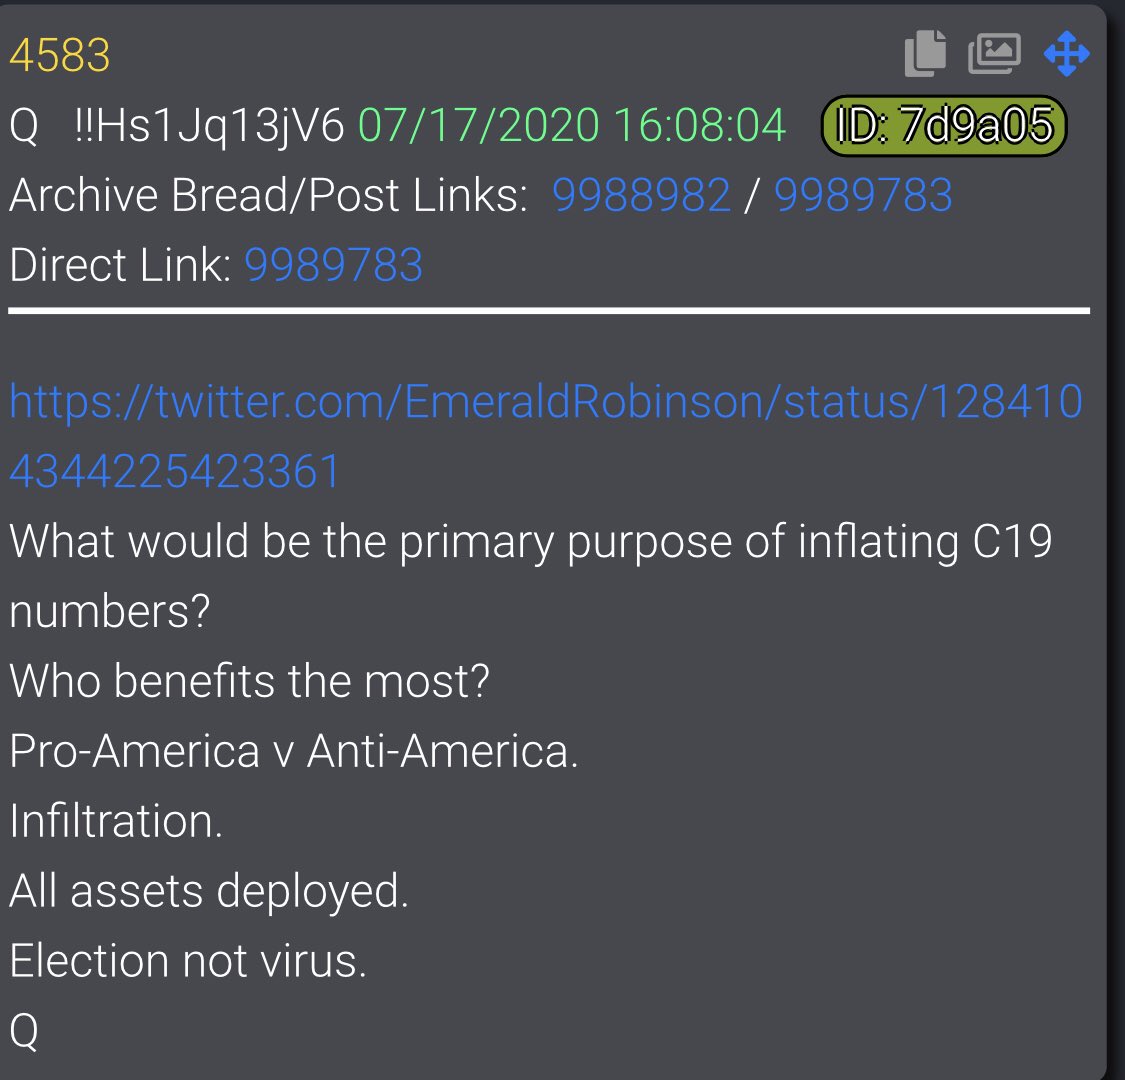  #QAlert 7/17/20 Q4583 https://twitter.com/EmeraldRobinson/status/1284104344225423361What would be the primary purpose of inflating C19 numbers?Who benefits the most?Pro-America v Anti-America.Infiltration.All assets deployed.Election not virus.Q